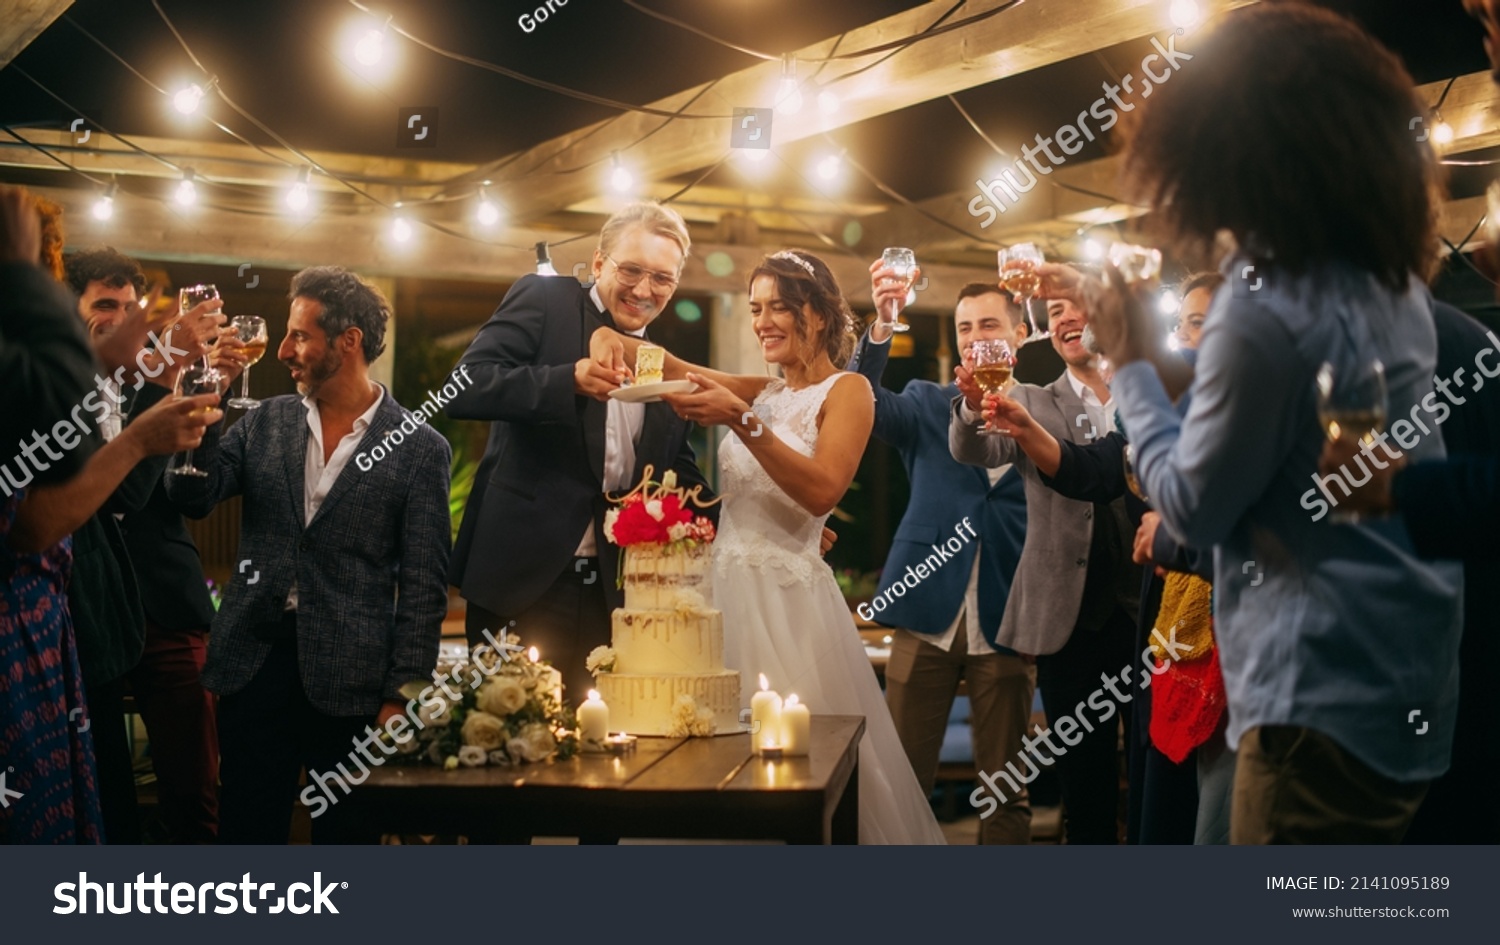 Beautiful Bride and Groom Celebrate Wedding at an Evening Reception Party with Multiethnic Friends. Married Couple Standing at a Dinner Table, Kiss and Cut Wedding Cake. #2141095189